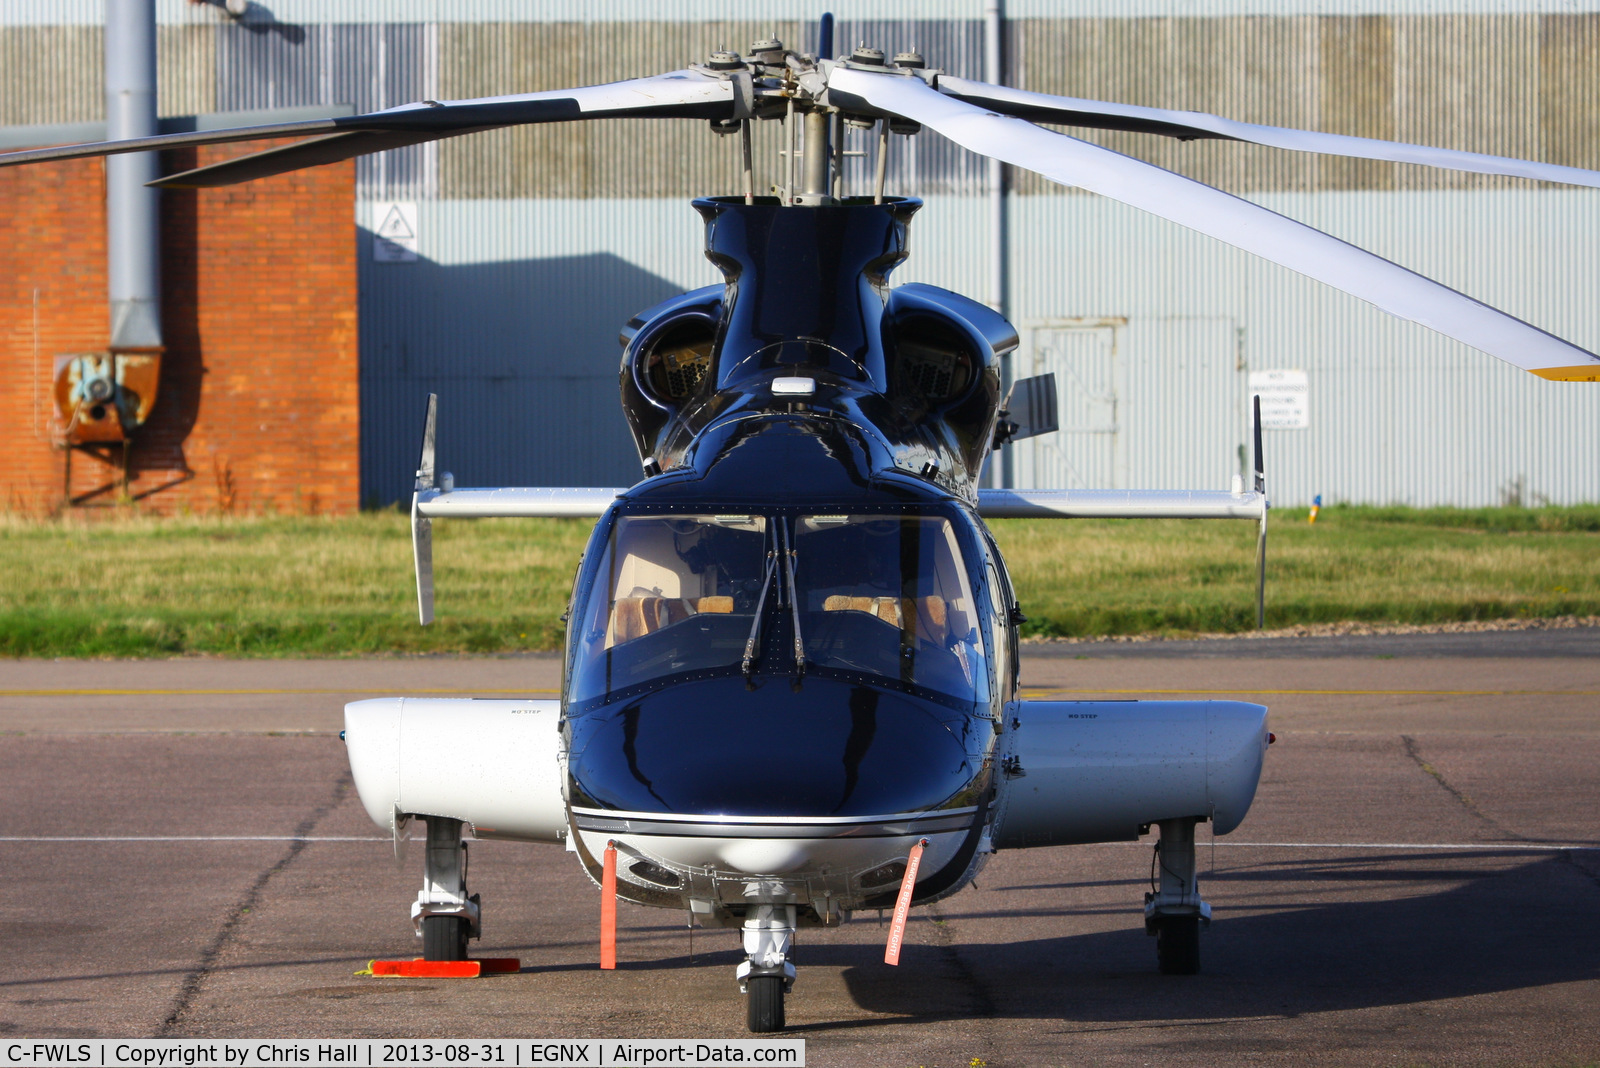 C-FWLS, 2000 Bell 430 C/N 49066, unusual to see a Canadian registered helicopter in the UK